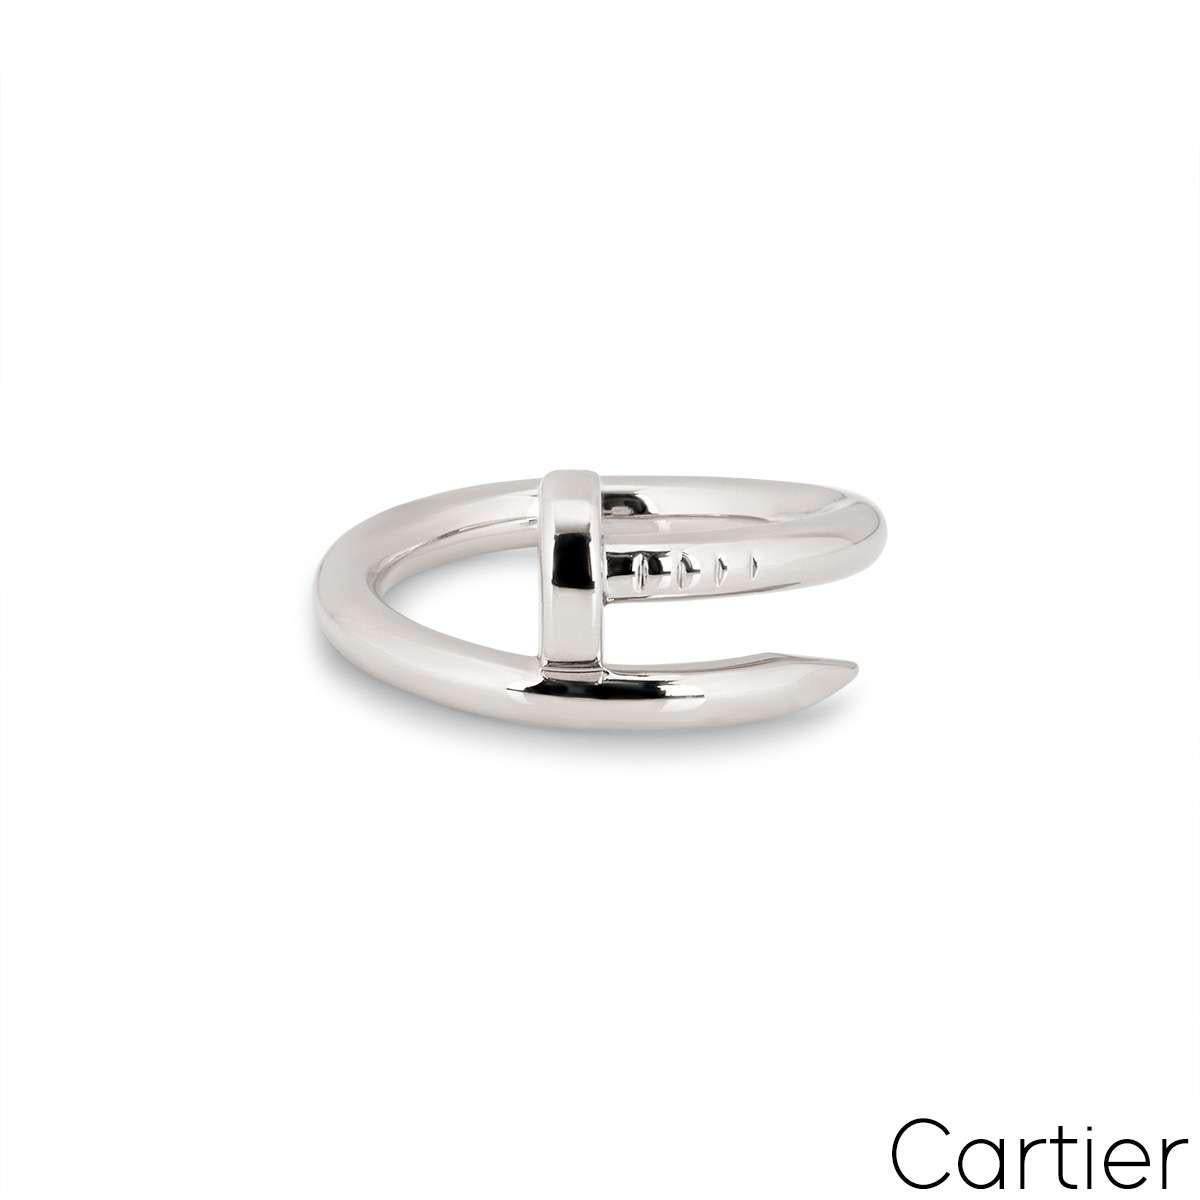 Cartier White Gold Plain Juste un Clou Ring Size 50 B4099200 In Excellent Condition For Sale In London, GB